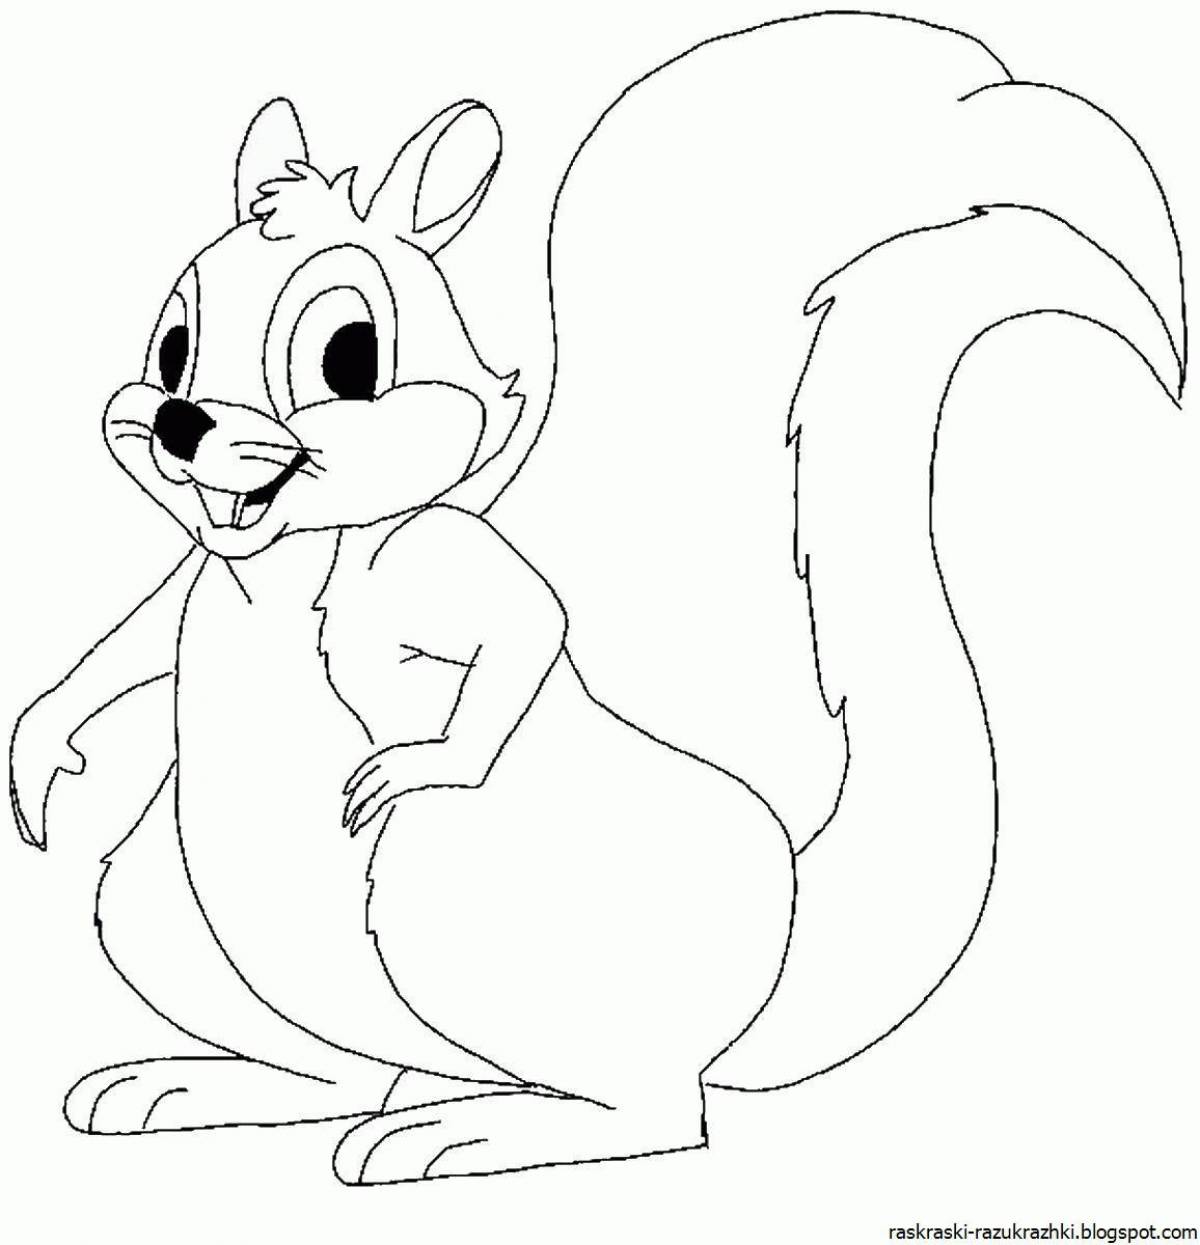 Naughty squirrel coloring book for kids